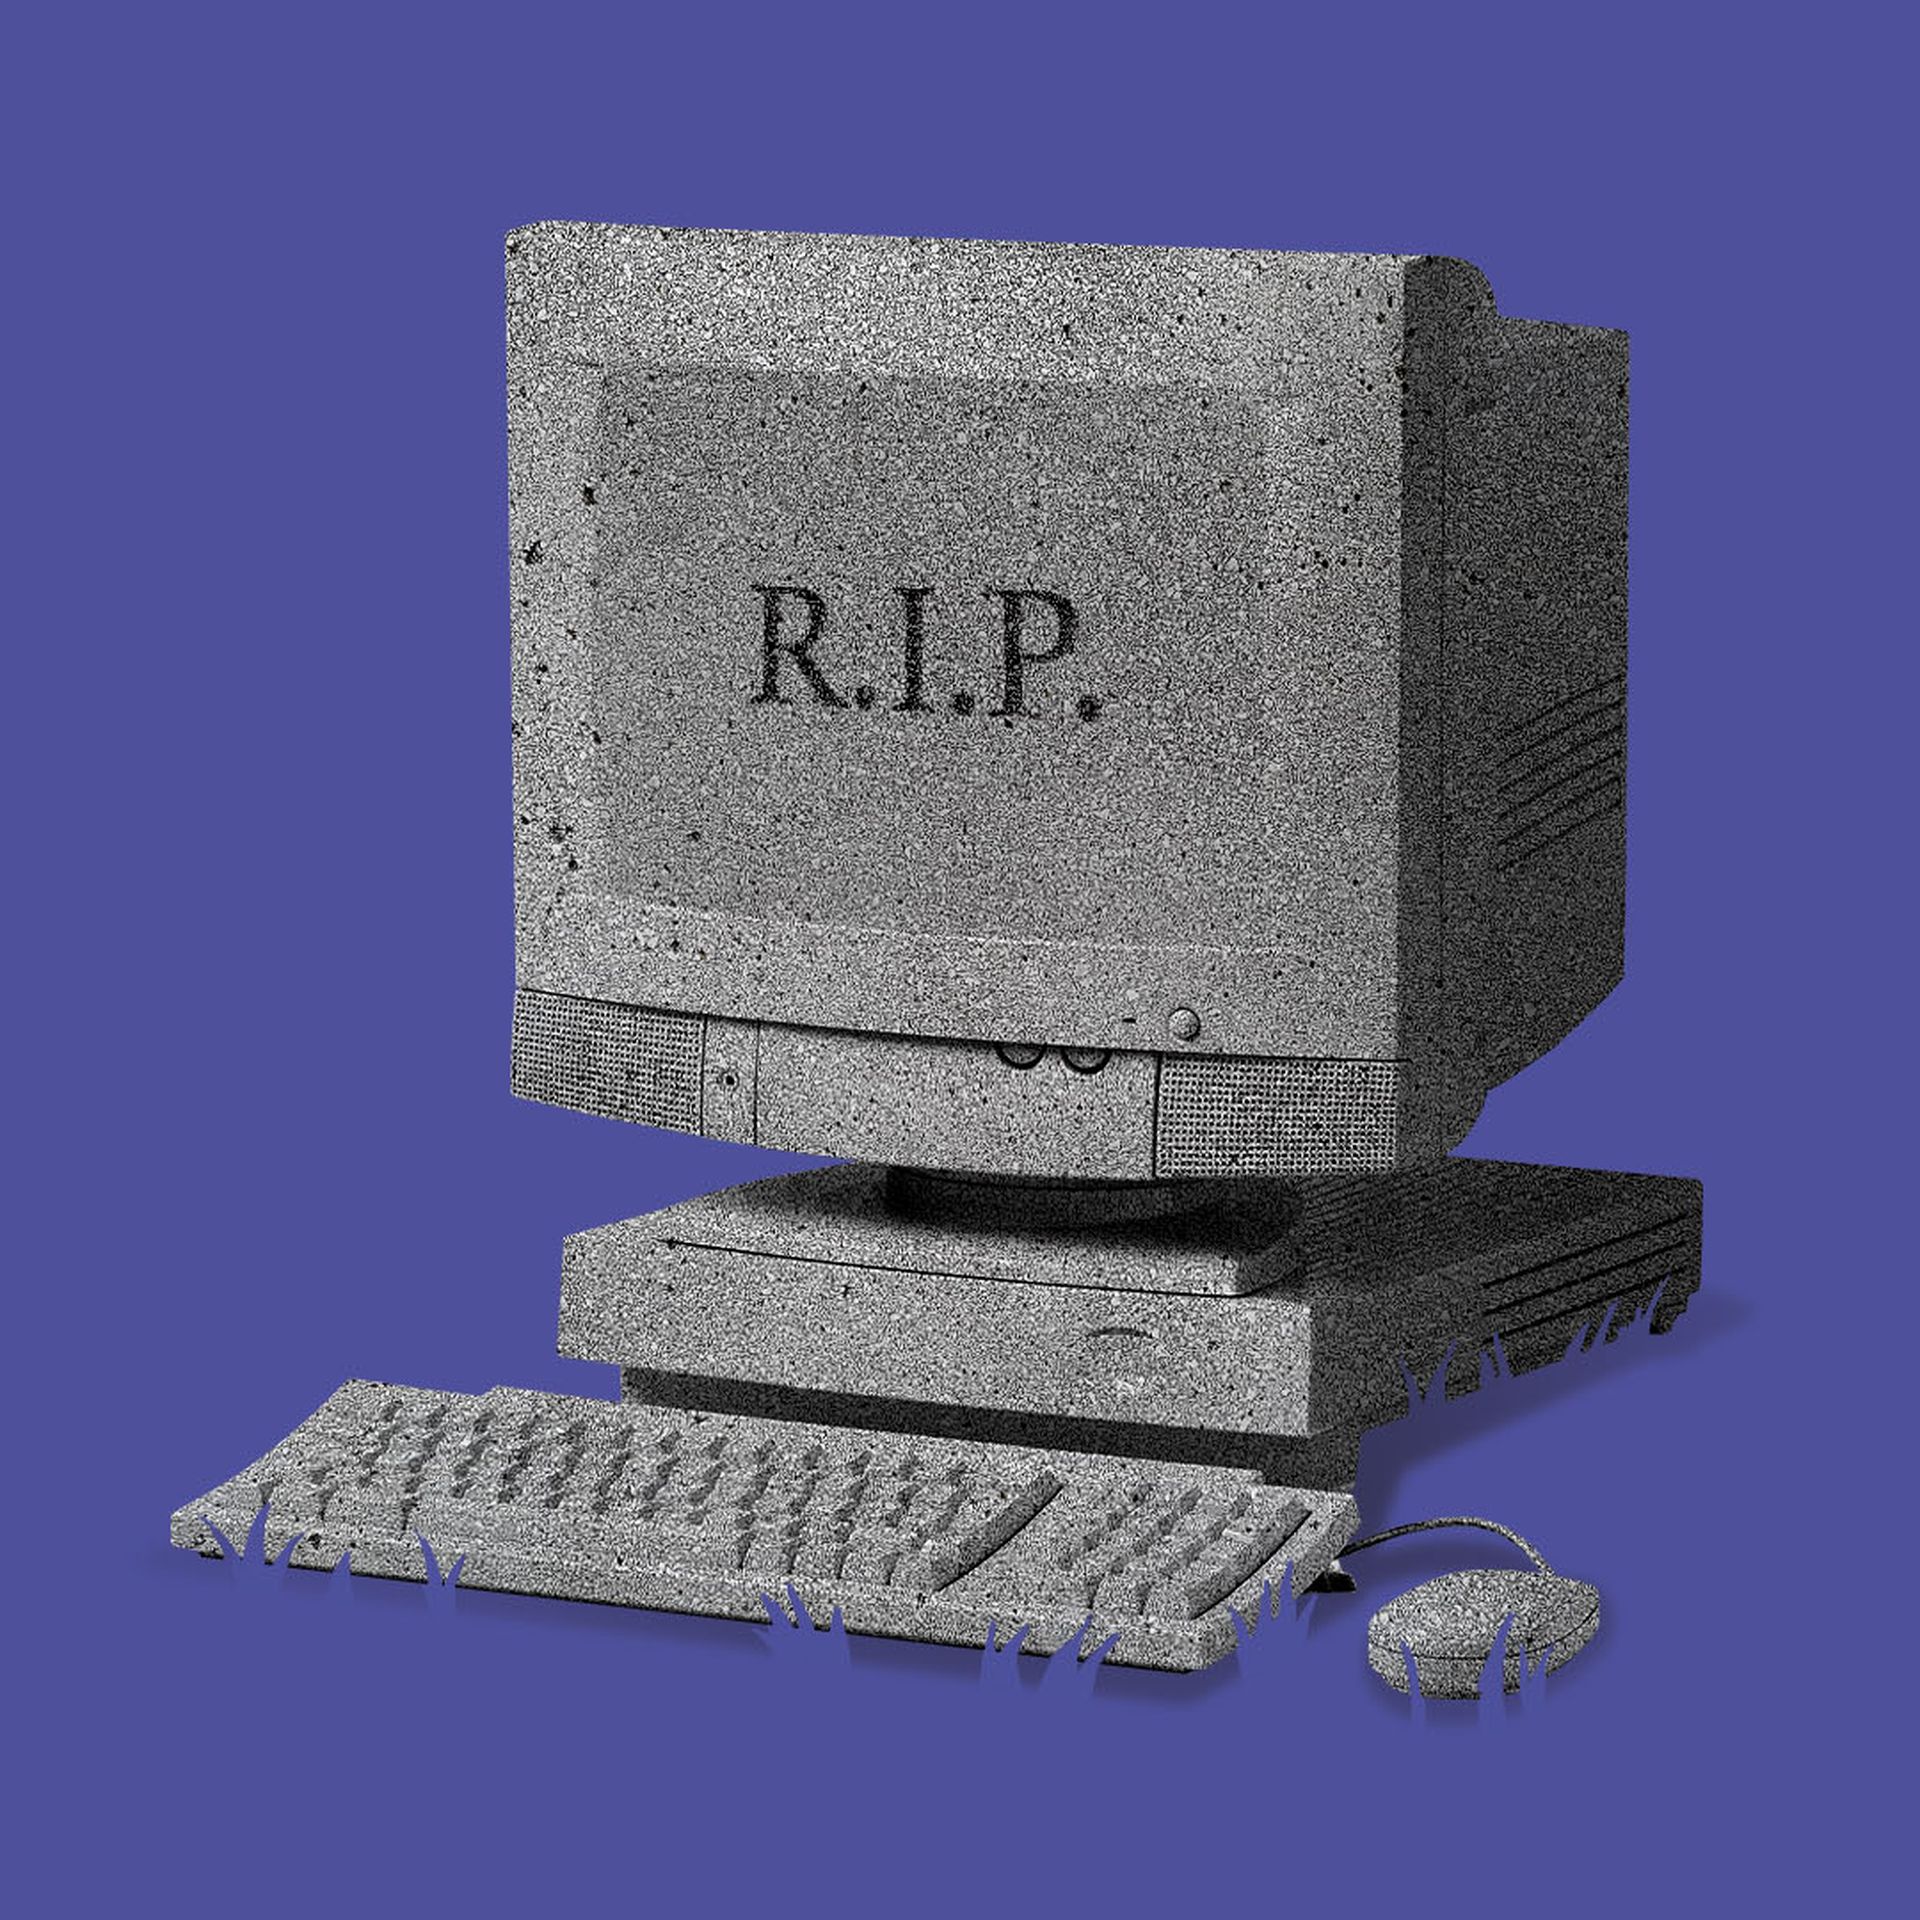 Illustration of a tombstone shaped like a computer